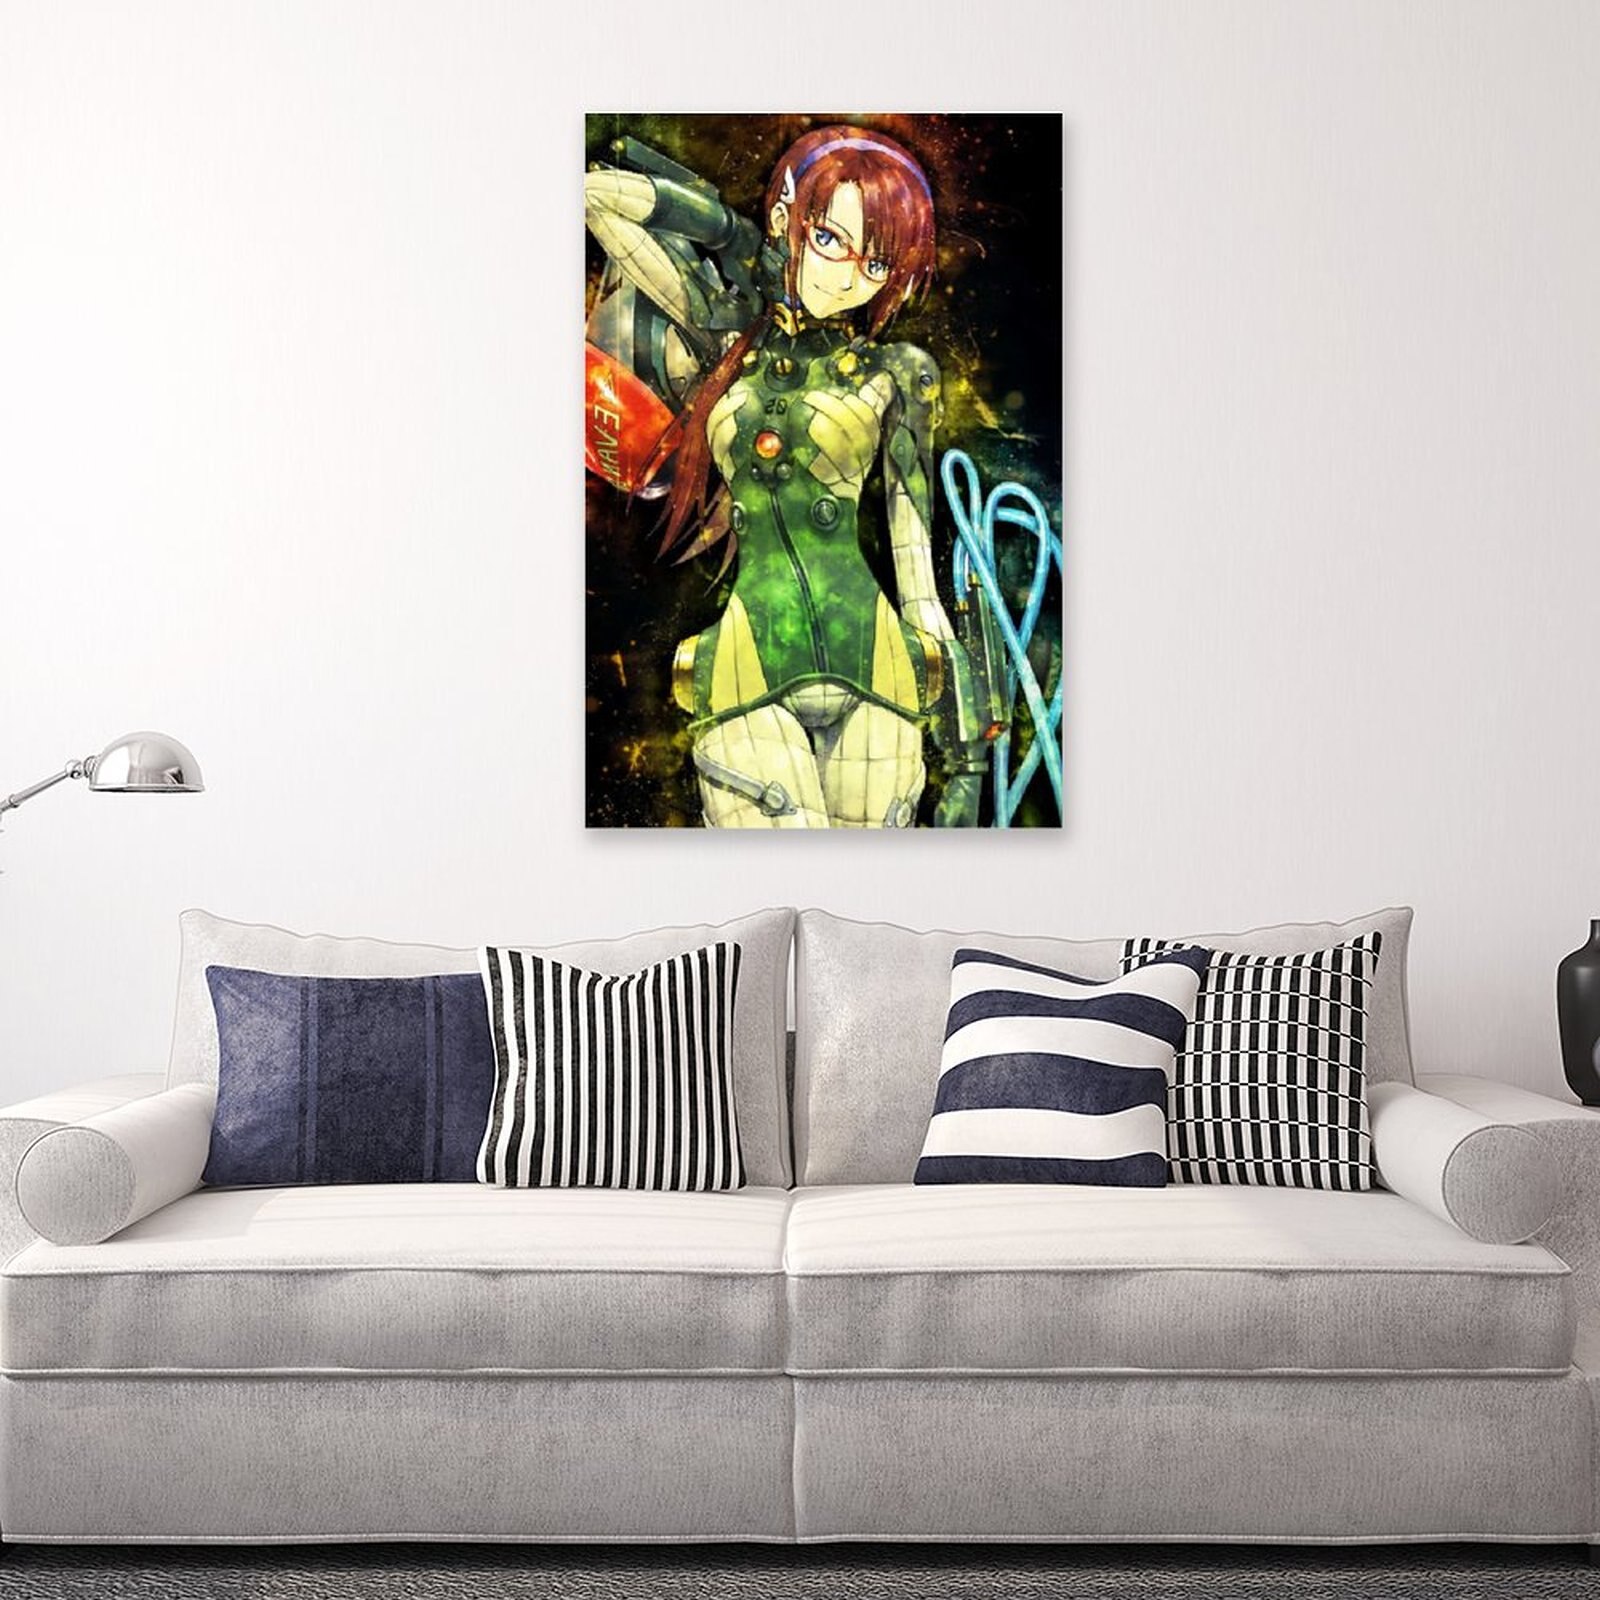 Anime Evangelion Girl MakinamiCanvas Painting Wall Art Posters and Prints Wall Pictures for Living Room Decoration 4 - Evangelion Shop